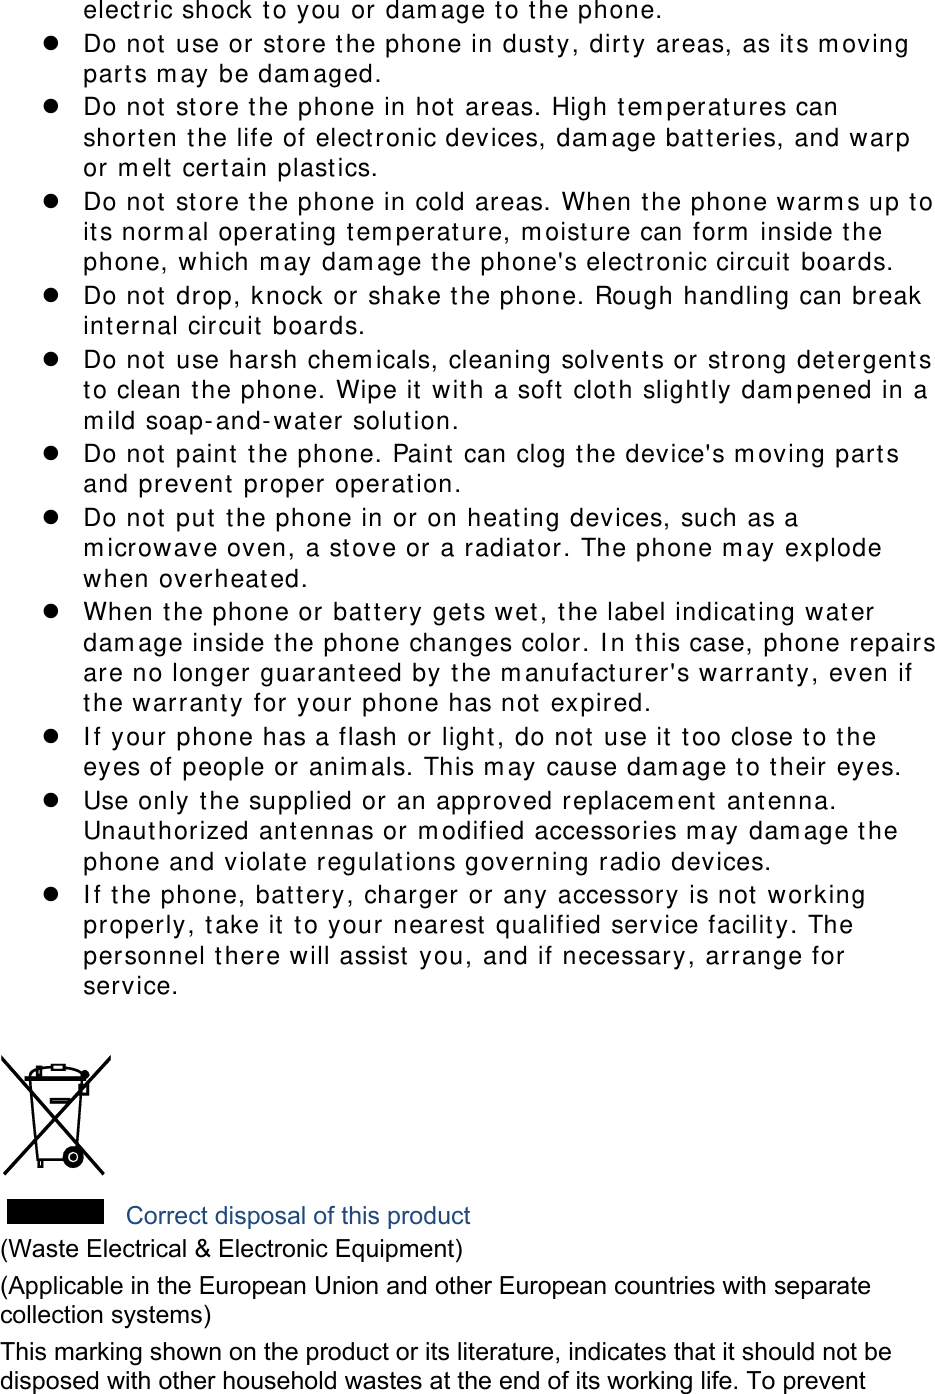 electric shock to you or damage to the phone.  Do not use or store the phone in dusty, dirty areas, as its moving parts may be damaged.  Do not store the phone in hot areas. High temperatures can shorten the life of electronic devices, damage batteries, and warp or melt certain plastics.  Do not store the phone in cold areas. When the phone warms up to its normal operating temperature, moisture can form inside the phone, which may damage the phone&apos;s electronic circuit boards.  Do not drop, knock or shake the phone. Rough handling can break internal circuit boards.  Do not use harsh chemicals, cleaning solvents or strong detergents to clean the phone. Wipe it with a soft cloth slightly dampened in a mild soap-and-water solution.  Do not paint the phone. Paint can clog the device&apos;s moving parts and prevent proper operation.  Do not put the phone in or on heating devices, such as a microwave oven, a stove or a radiator. The phone may explode when overheated.  When the phone or battery gets wet, the label indicating water damage inside the phone changes color. In this case, phone repairs are no longer guaranteed by the manufacturer&apos;s warranty, even if the warranty for your phone has not expired.   If your phone has a flash or light, do not use it too close to the eyes of people or animals. This may cause damage to their eyes.  Use only the supplied or an approved replacement antenna. Unauthorized antennas or modified accessories may damage the phone and violate regulations governing radio devices.  If the phone, battery, charger or any accessory is not working properly, take it to your nearest qualified service facility. The personnel there will assist you, and if necessary, arrange for service.   Correct disposal of this product (Waste Electrical &amp; Electronic Equipment) (Applicable in the European Union and other European countries with separate collection systems) This marking shown on the product or its literature, indicates that it should not be disposed with other household wastes at the end of its working life. To prevent 